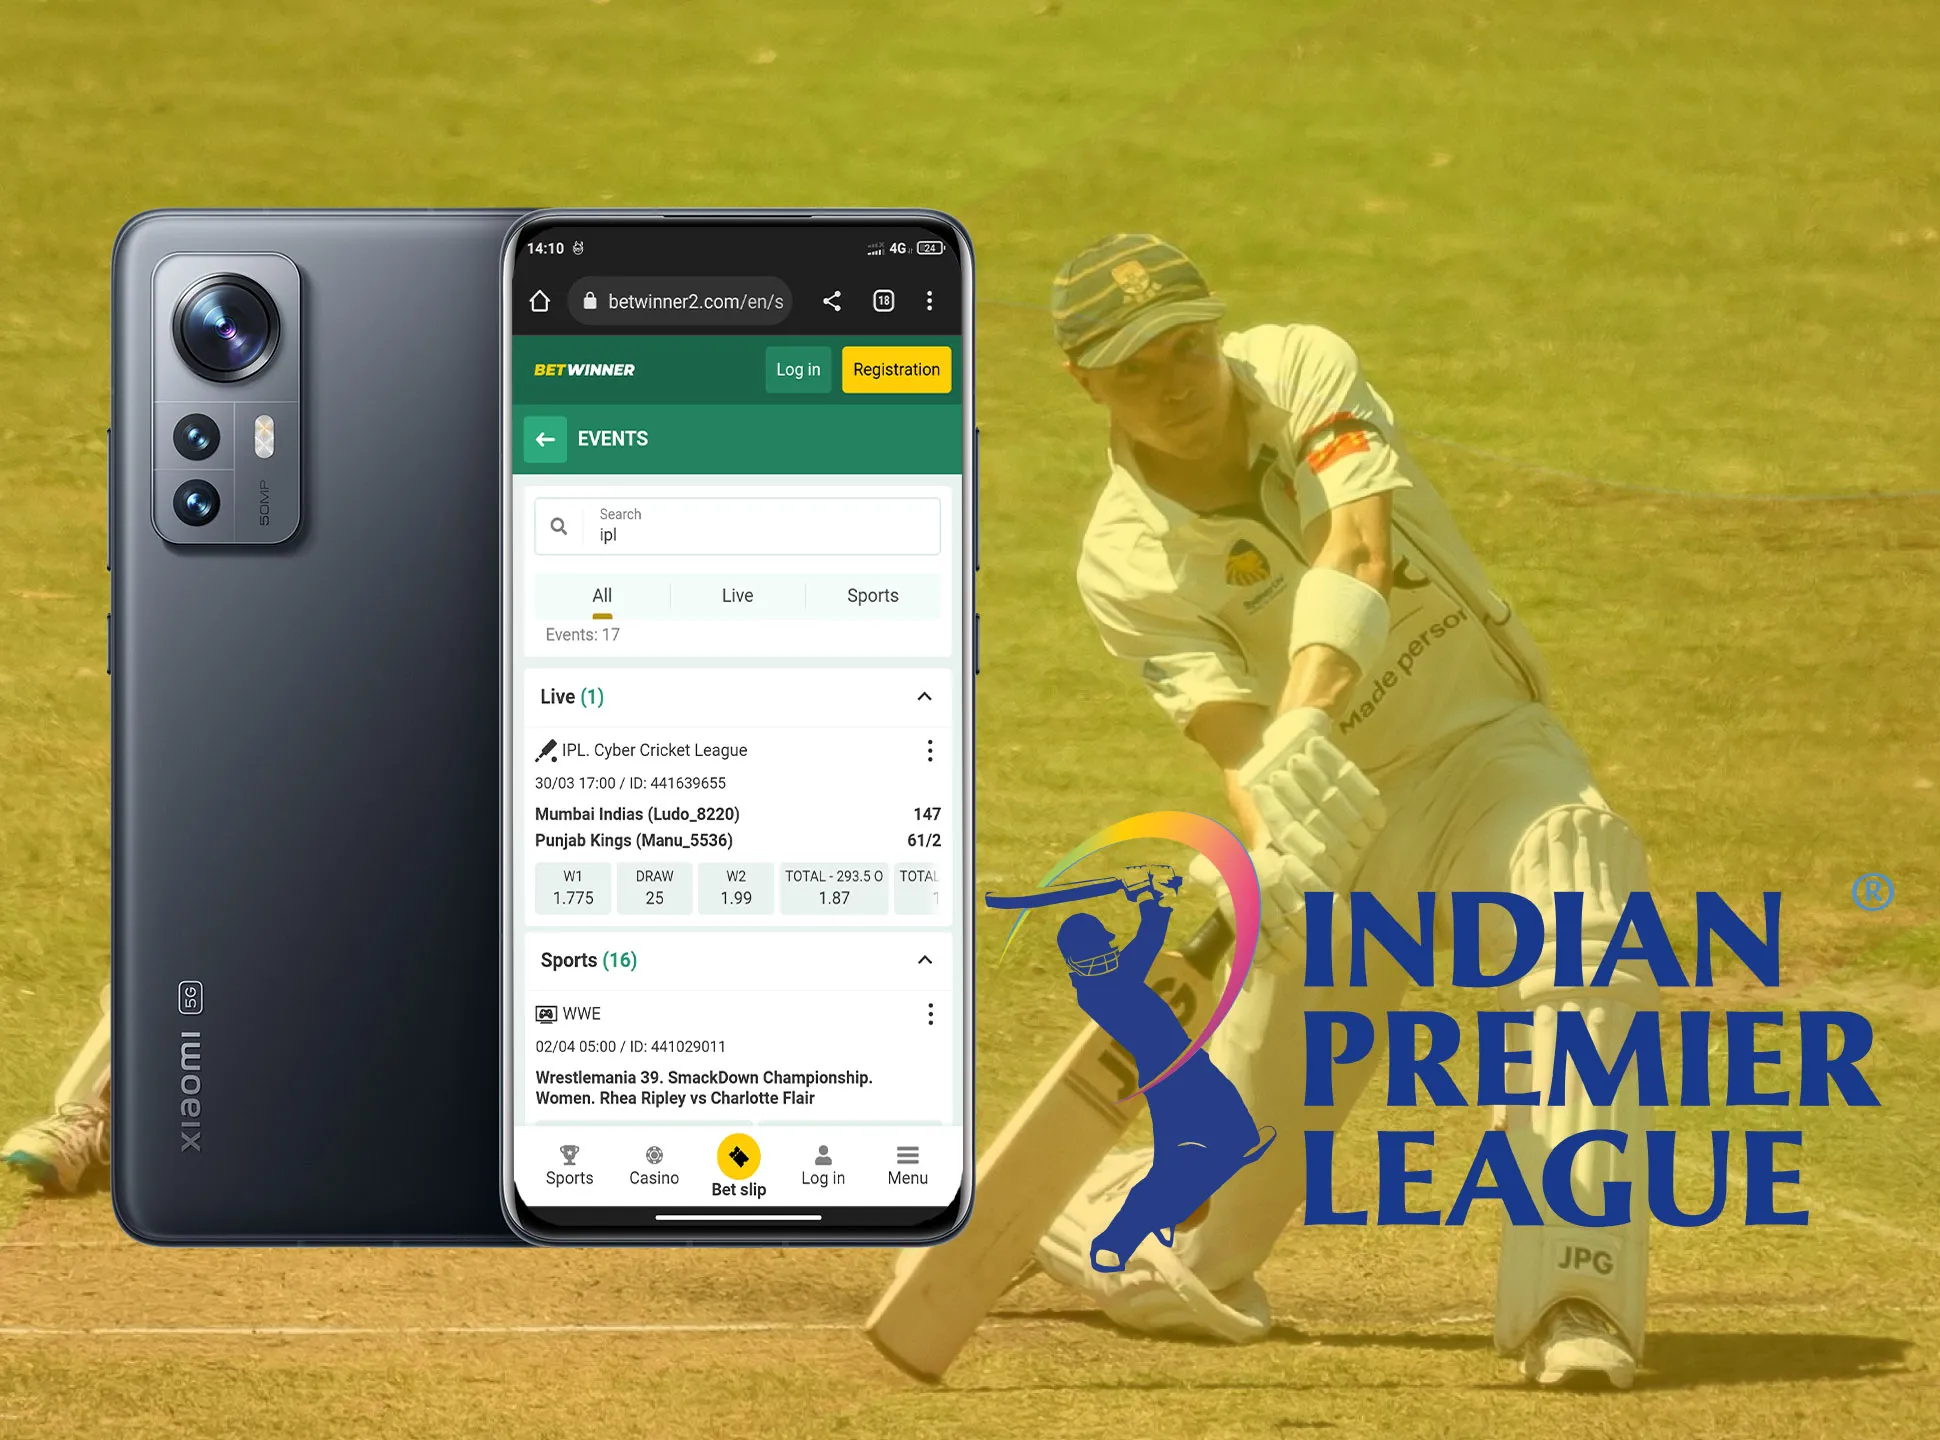 Betwinner offers IPL cricket betting in its mobile app.